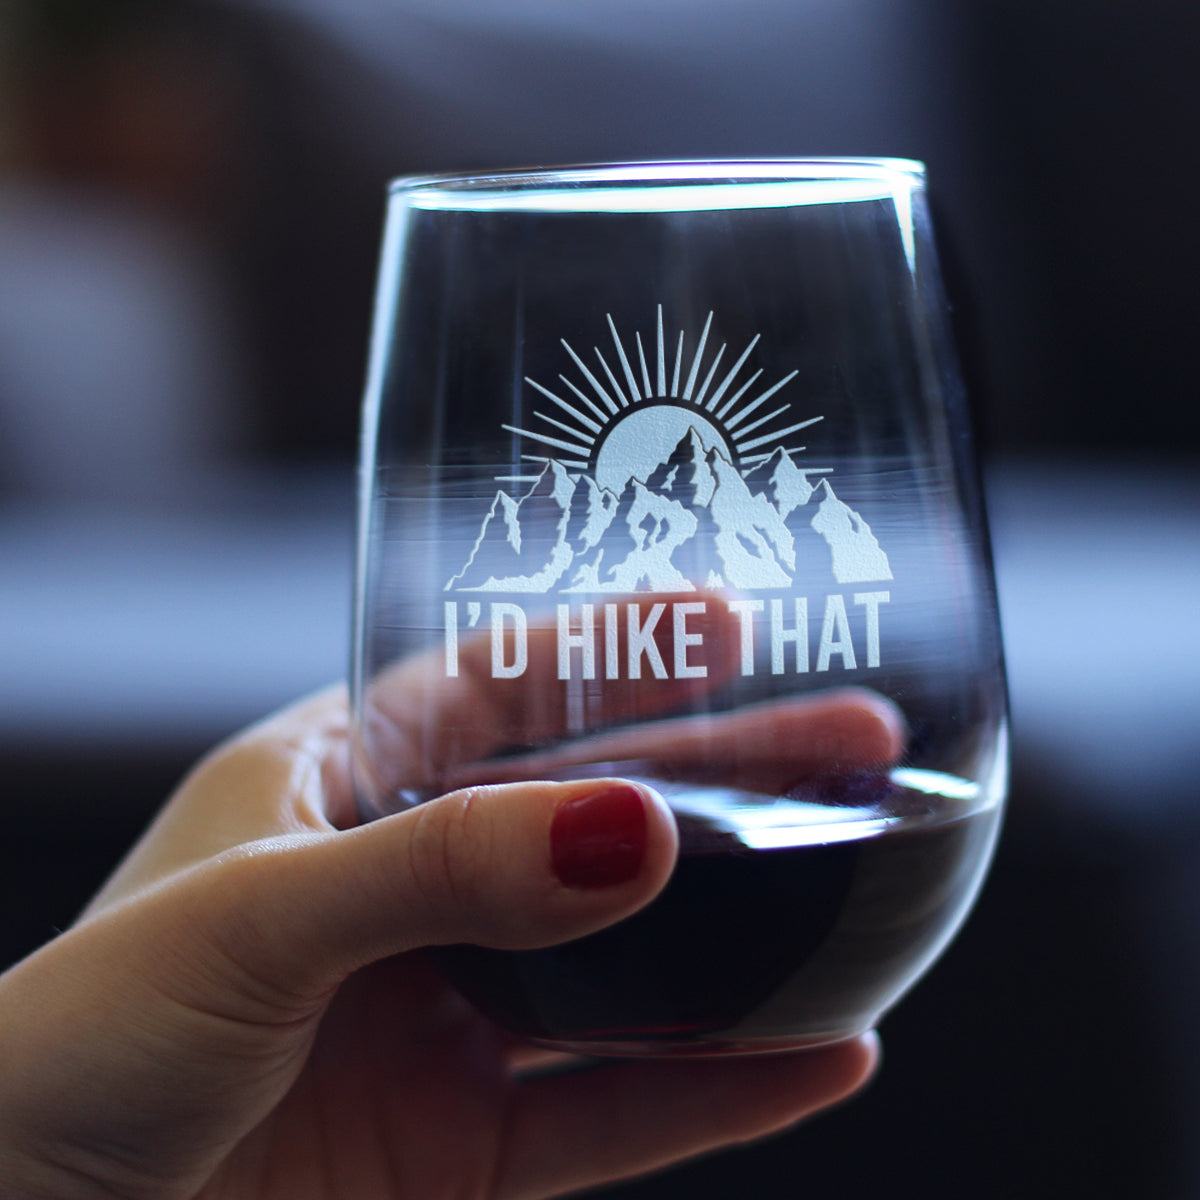 I&#39;d Hike That - Stemless Wine Glass - Cool Hiking Themed Decor and Gifts for Mountain Lovers - Large 17 Oz Glasses